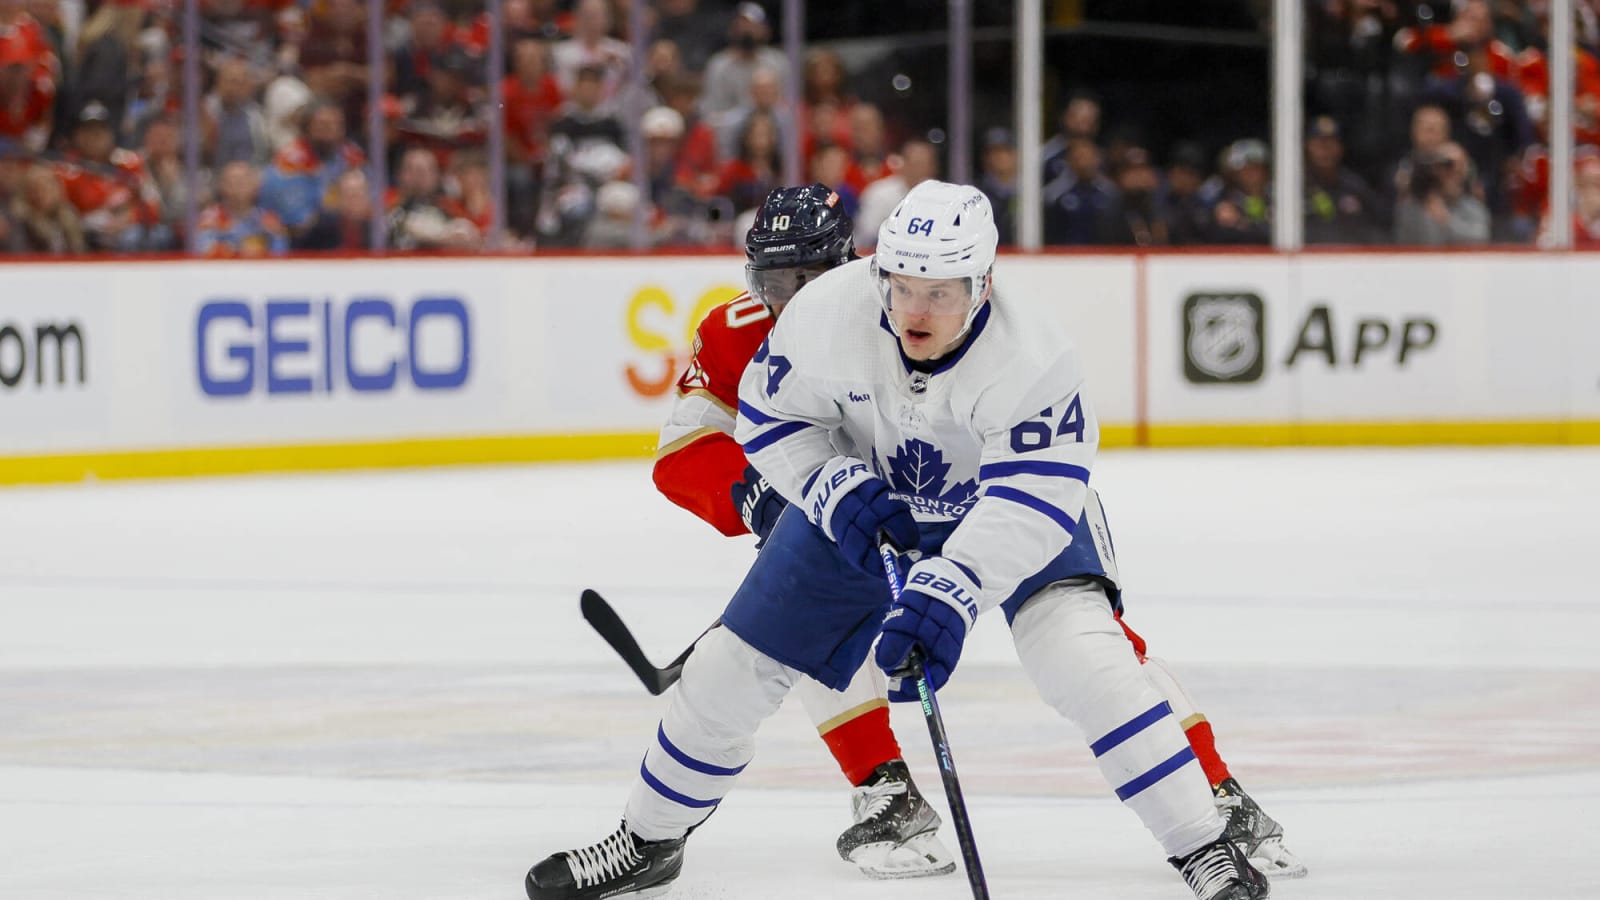 Maple Leafs Re-Sign Kampf to a Four-Year Contract